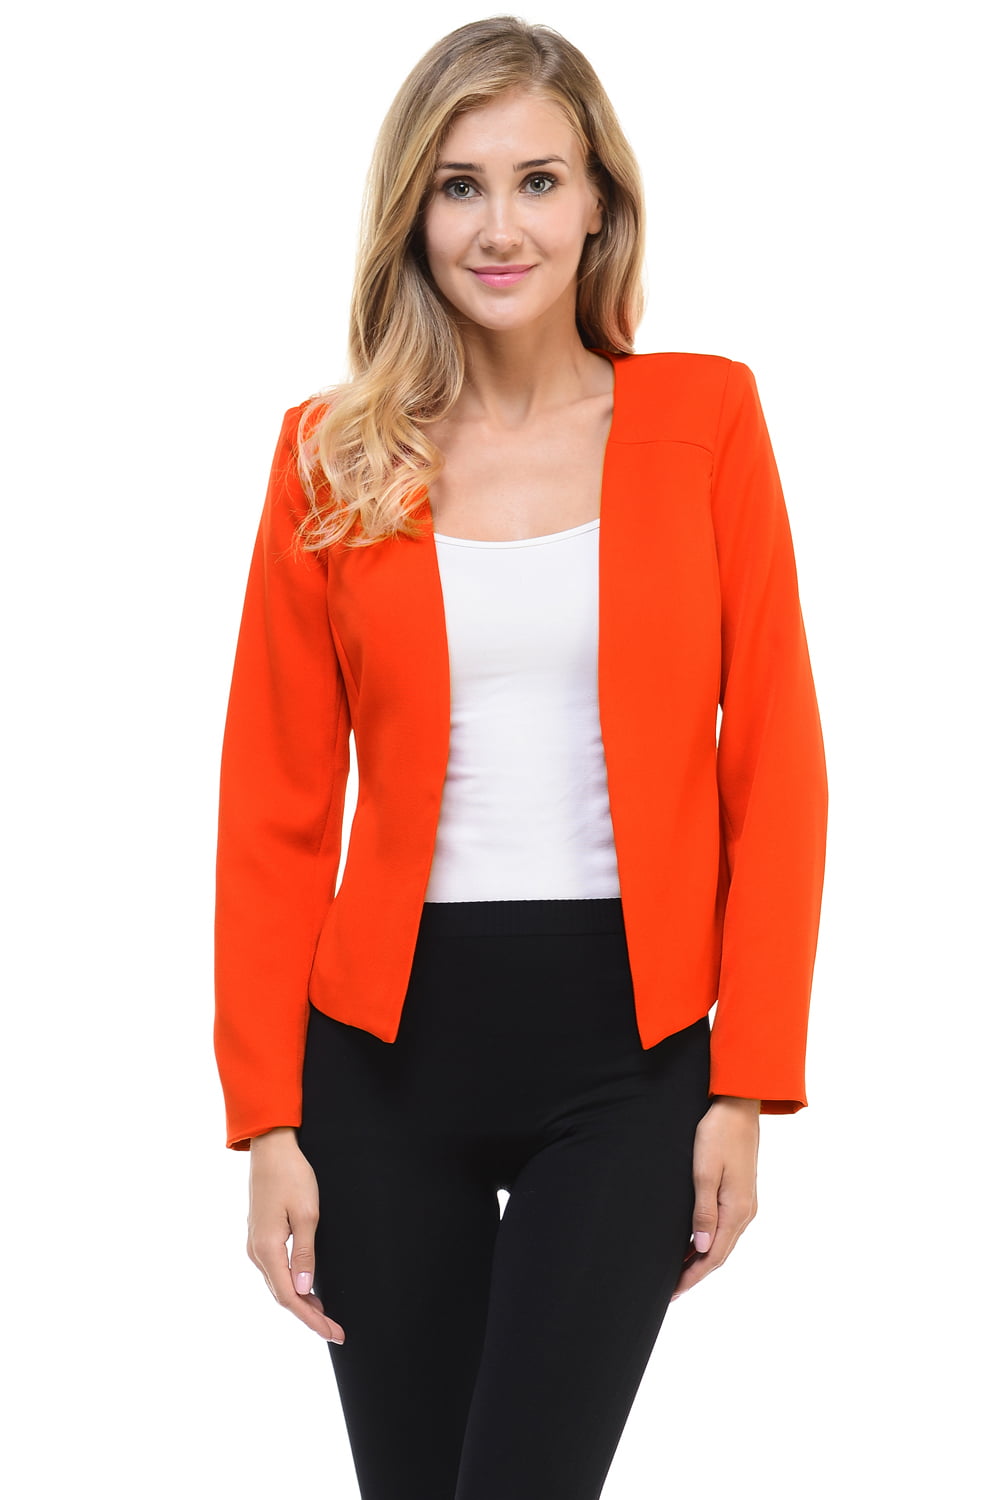 Auliné Collection Womens Candy Color Tailored Fit Open Suit Jacket ...